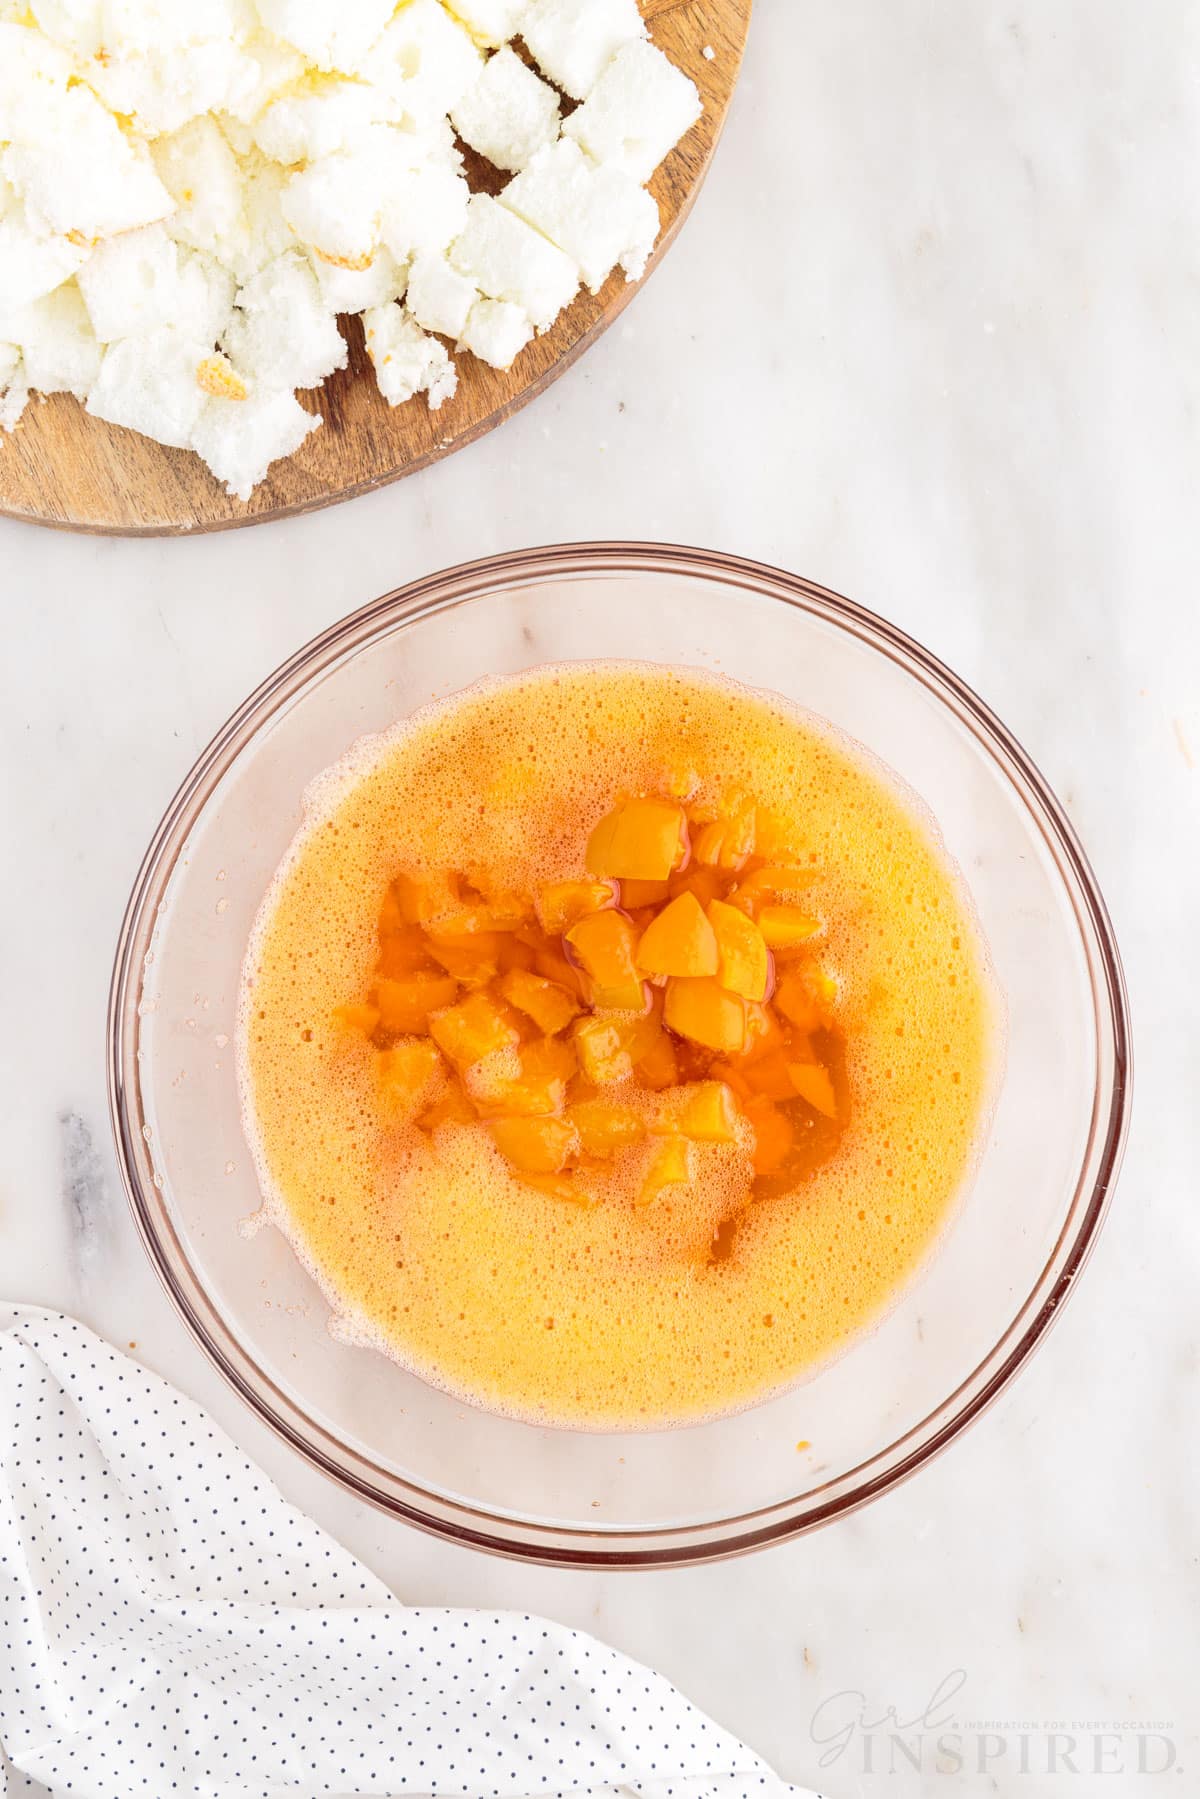 Apricots added to gelatin mixture in a mixing bowl to make Apricot Delight.